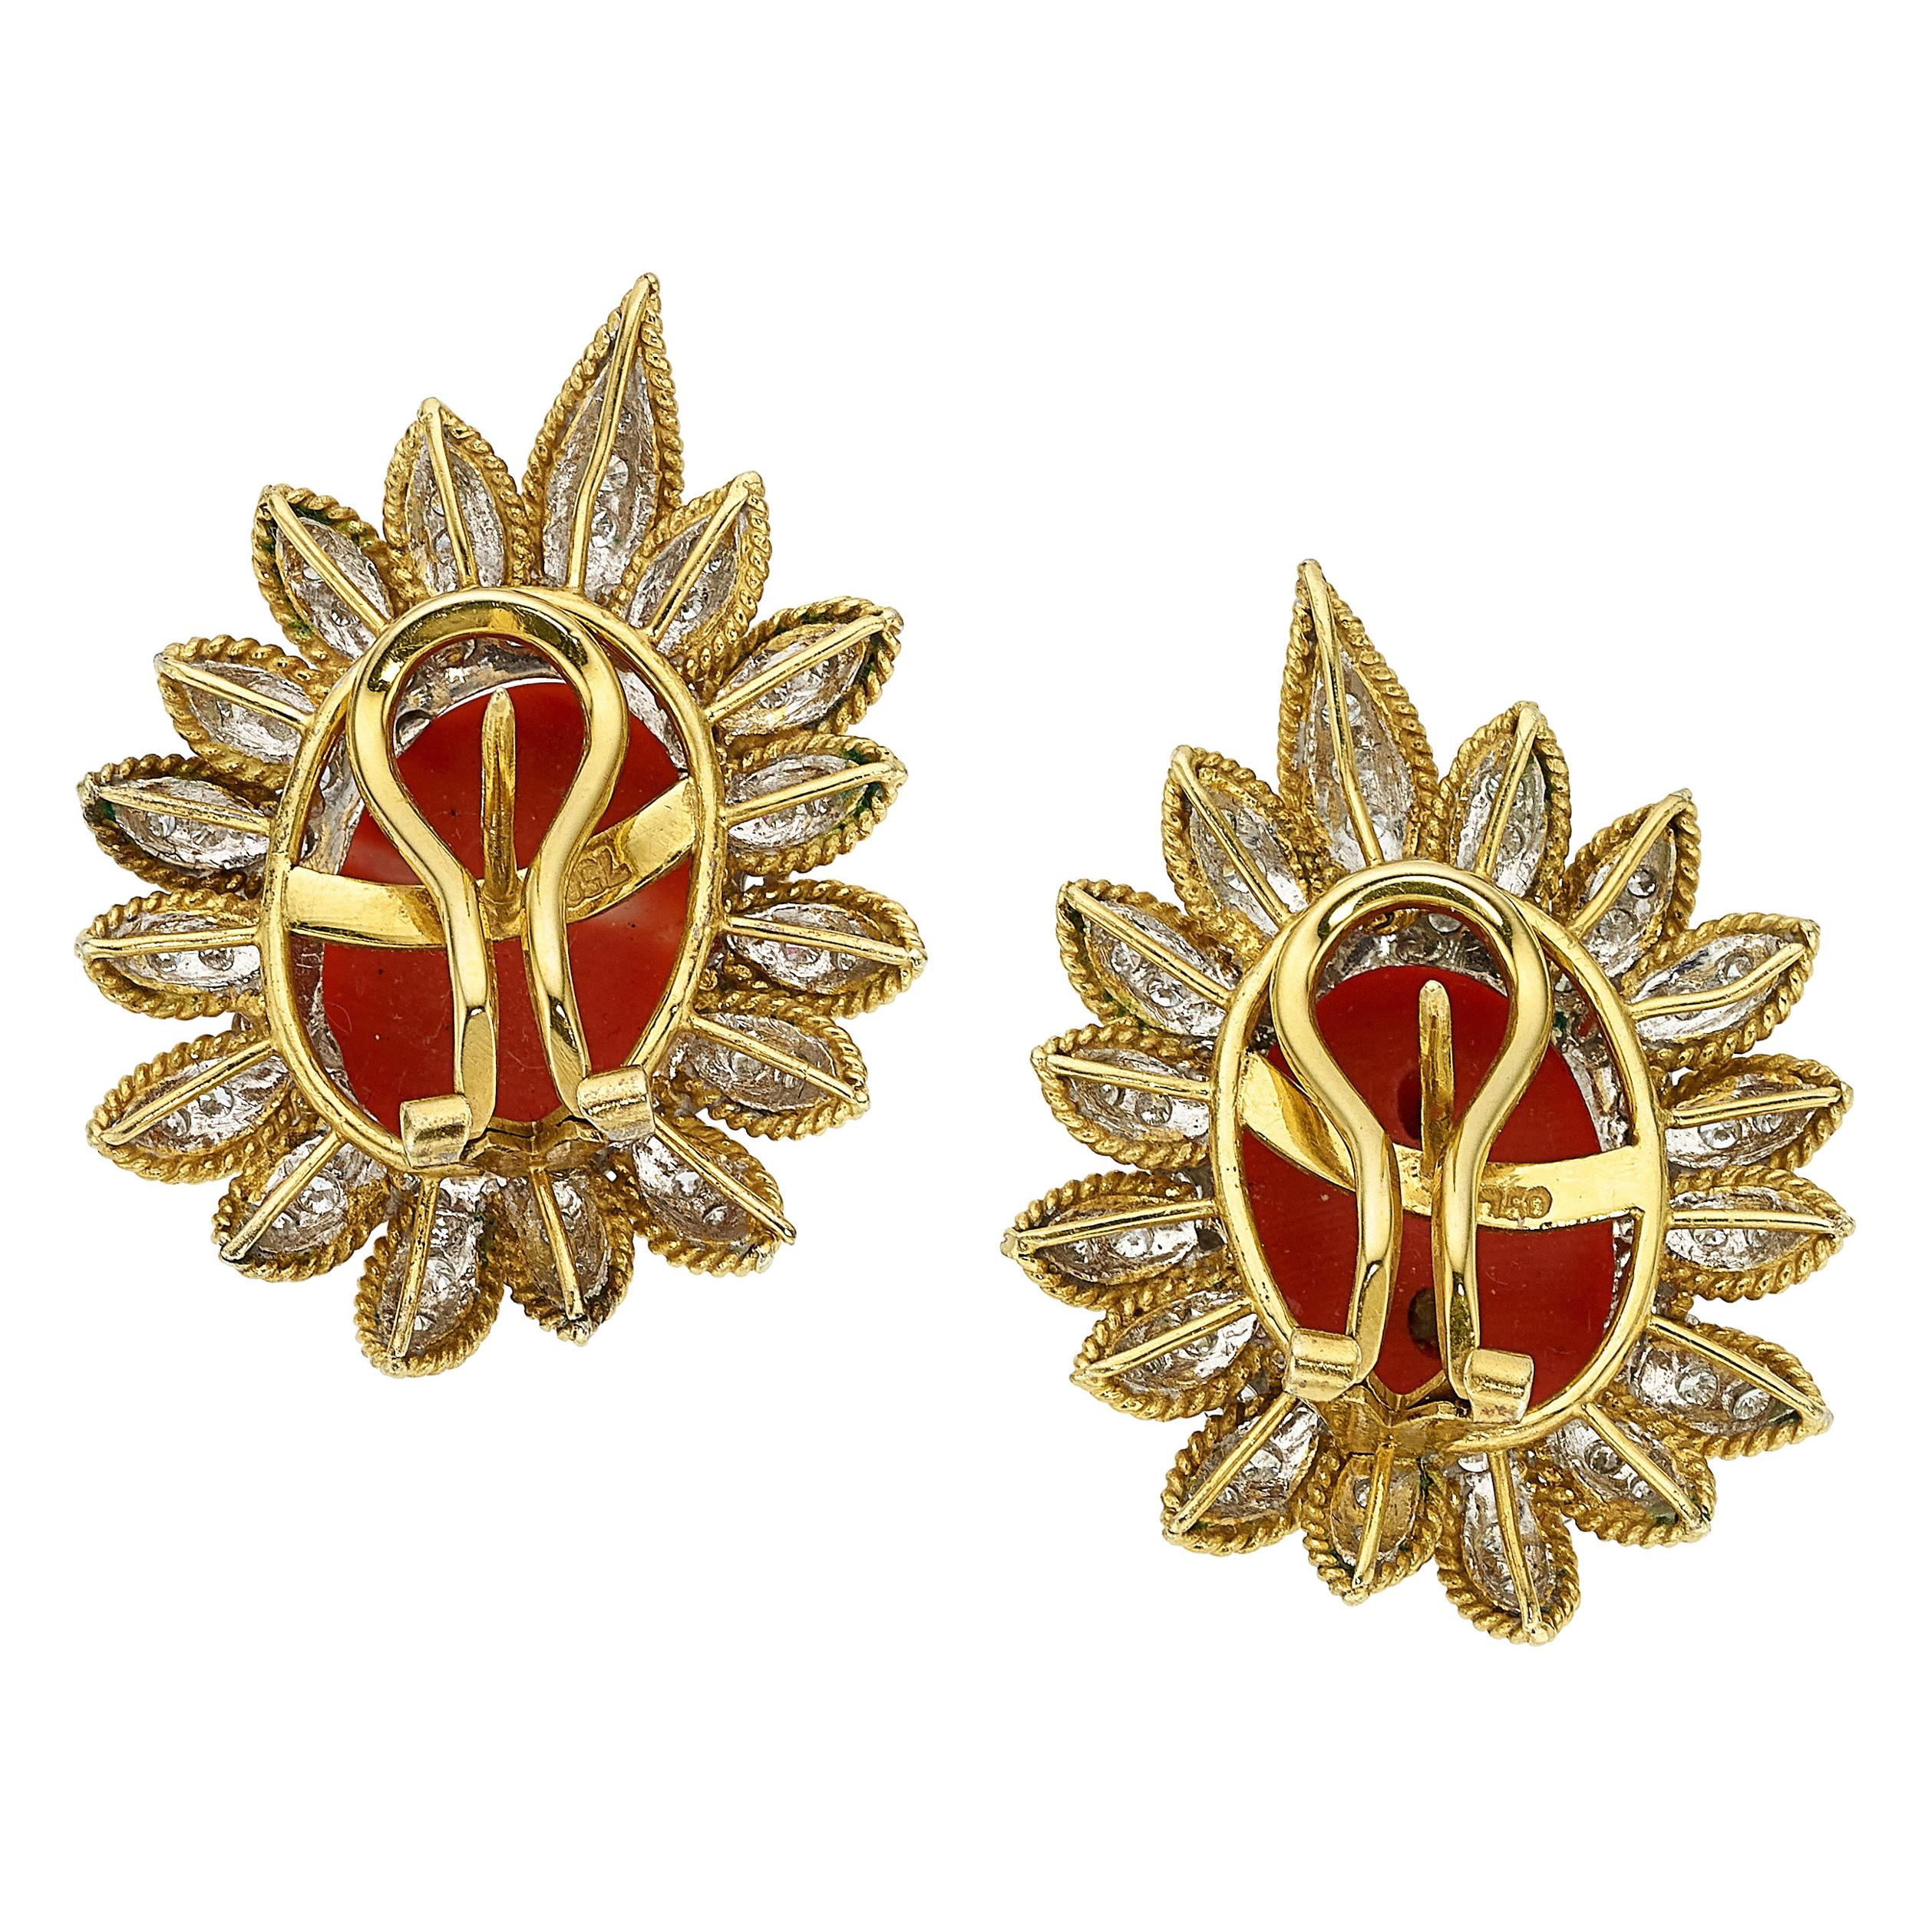 The earrings feature oval-shaped coral cabochons, enhanced by full-cut diamonds weighing a total of approximately 3.30 carats, set in 18k yellow and white gold having rhodium finished accents.

Earring Dimensions: 1 1/2 inches x 1 1/8 inches